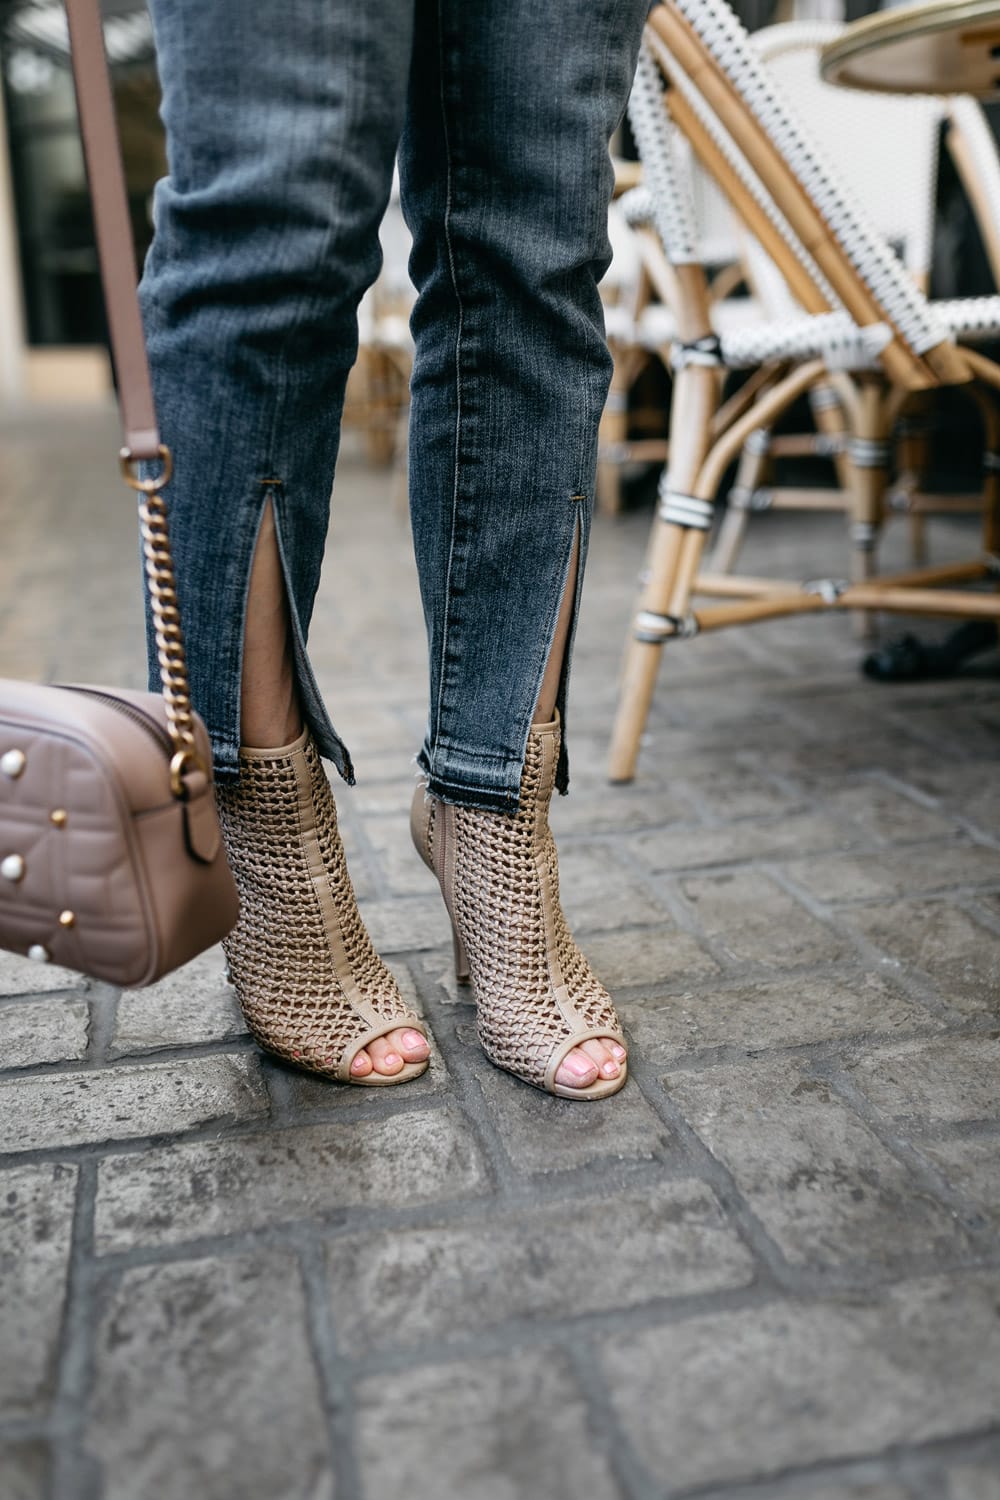 frame front split jeans gucci pearl marmont camera bag sam edelman perforated peep toe booties